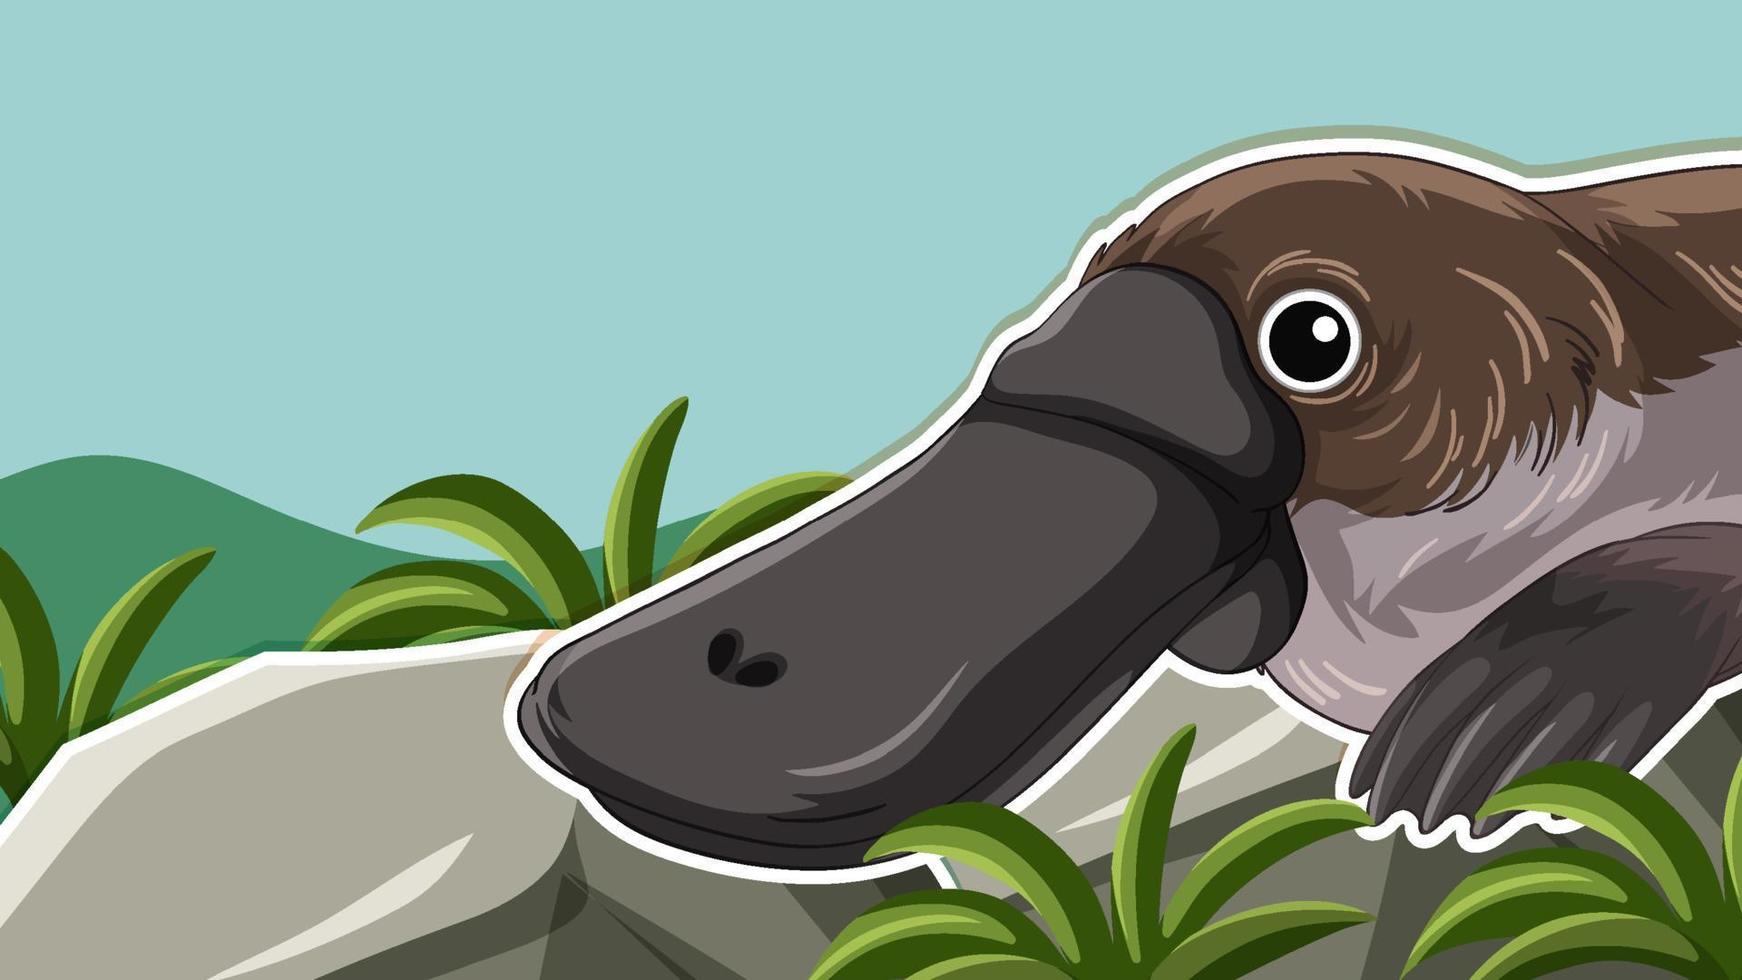 Thumbnail design with platypus vector